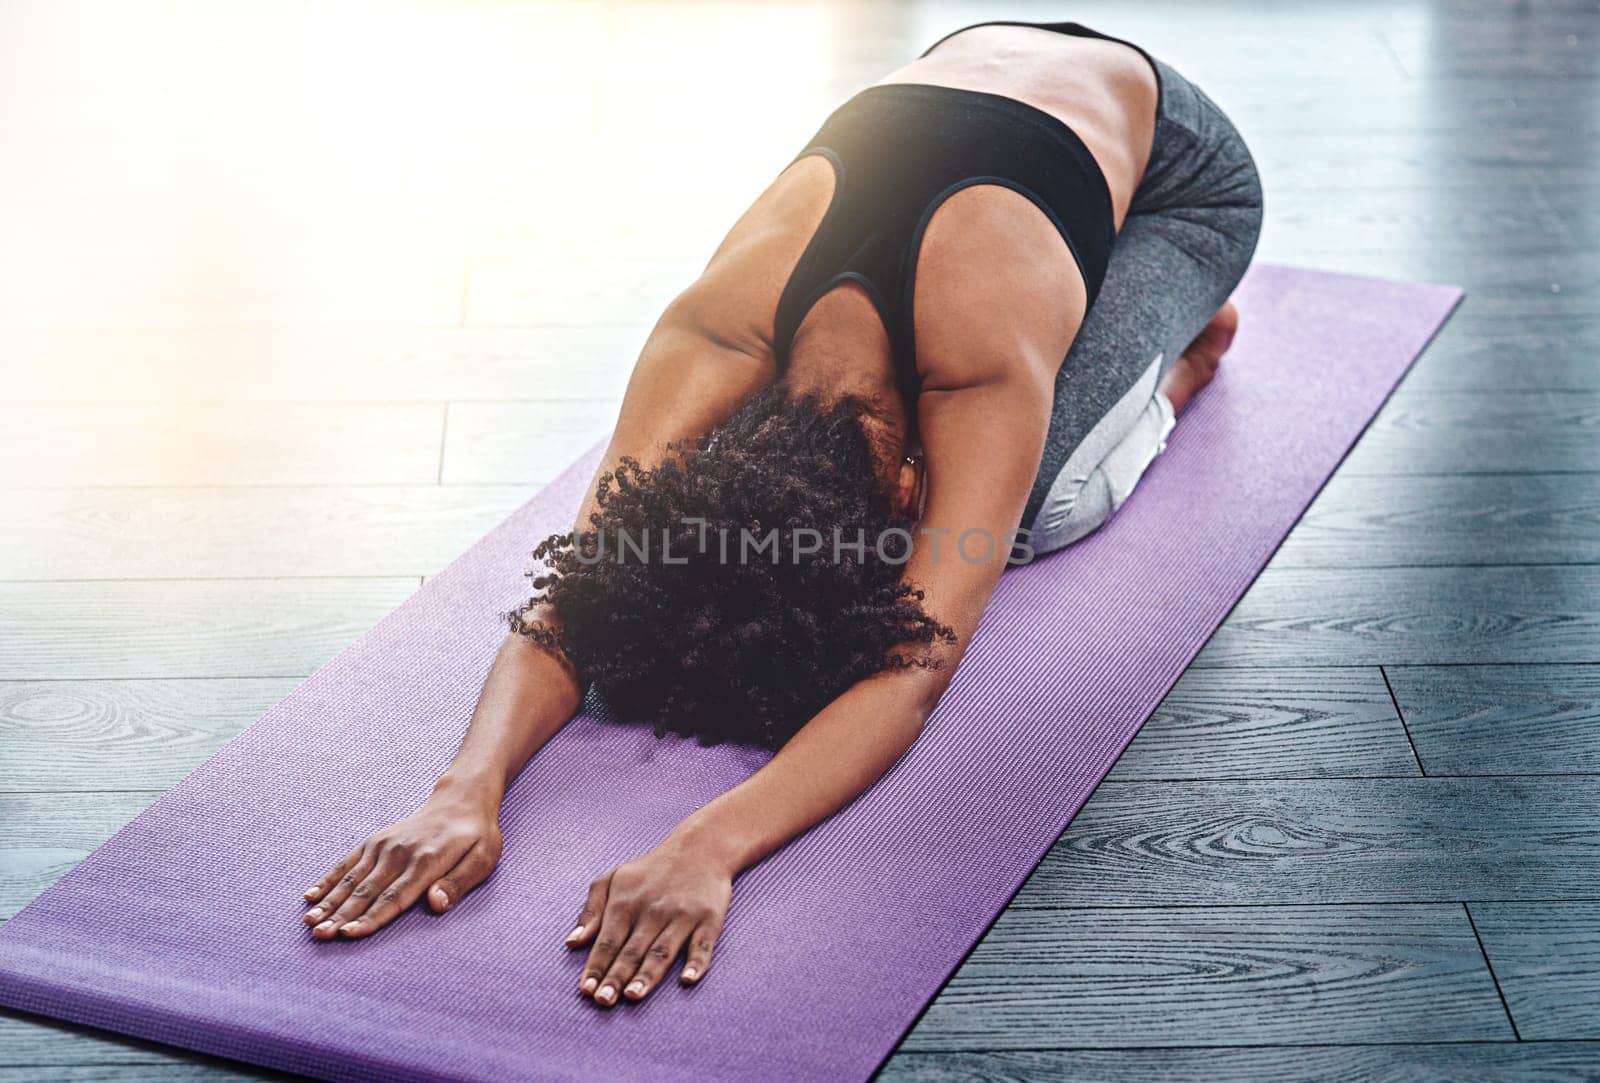 Yoga, workout and wellness with a woman in studio on an exercise mat for inner peace or to relax. Health, fitness and zen with a female athlete or yogi in the childs pose for balance or mindfulness.